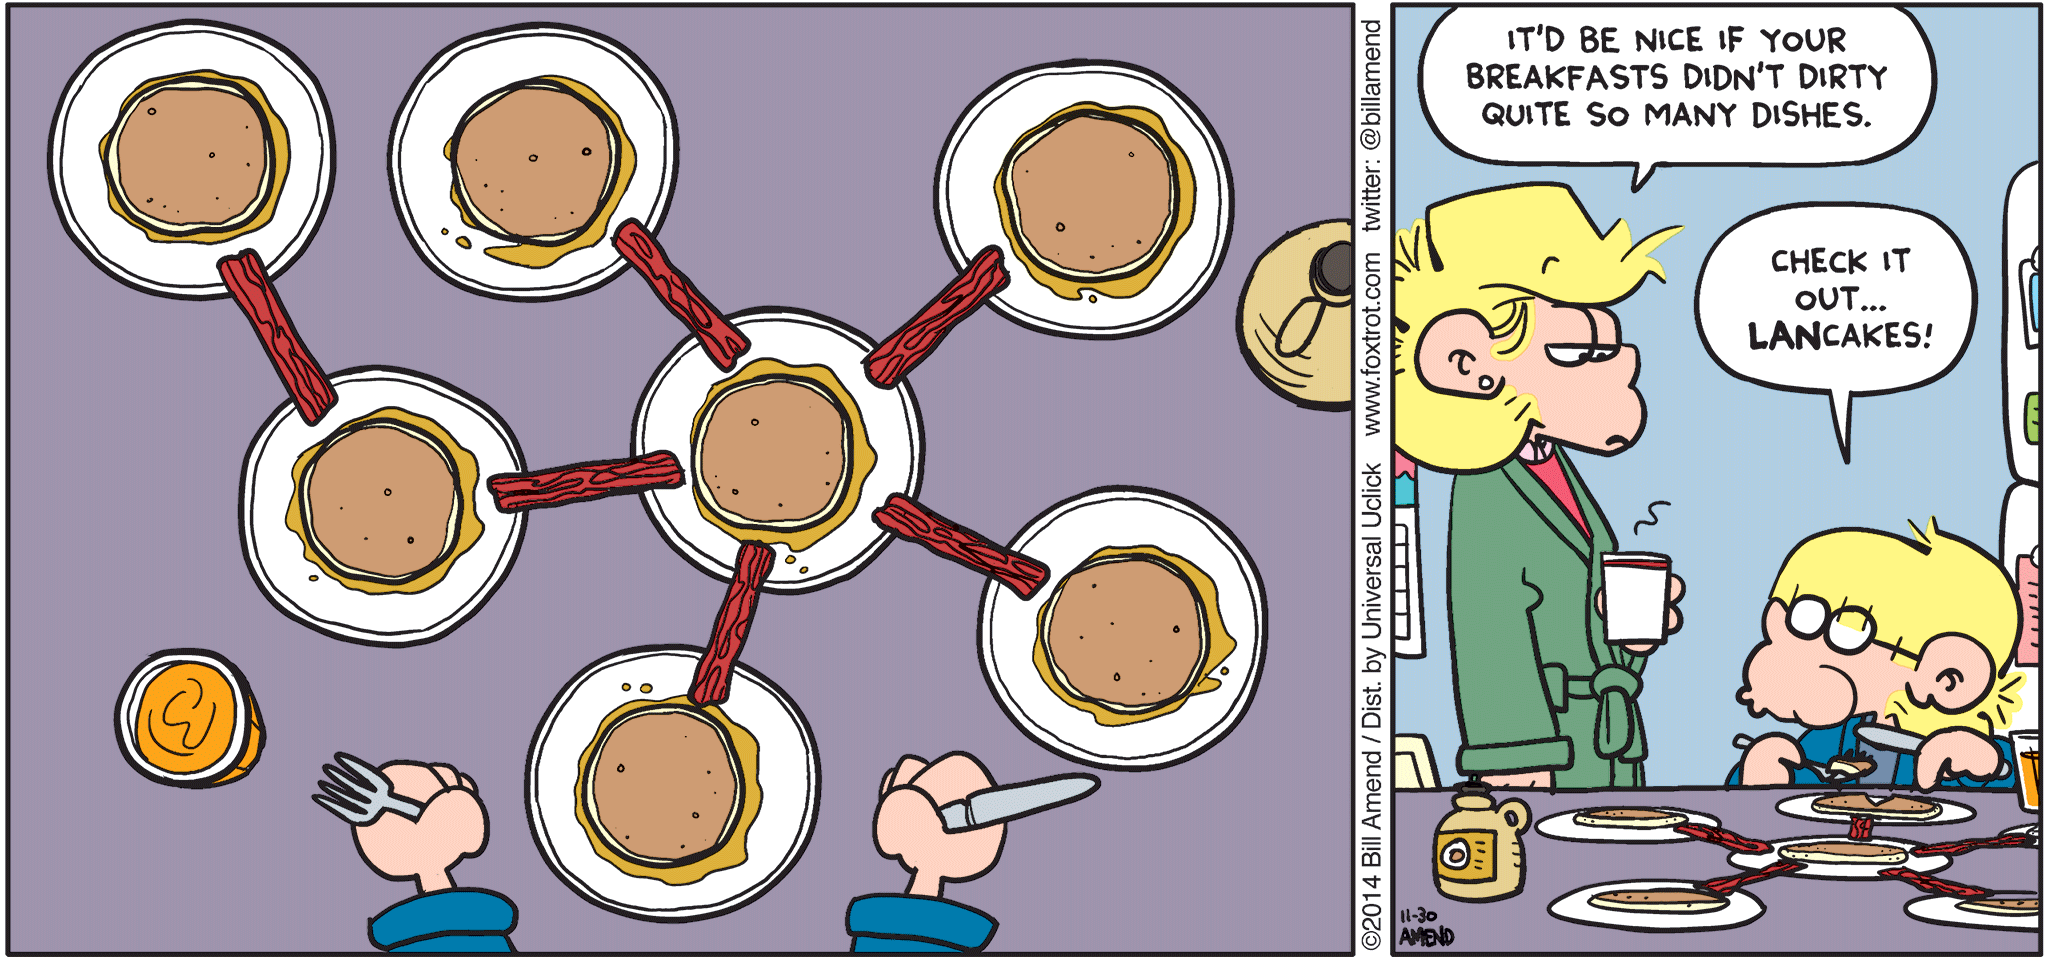 FoxTrot by Bill Amend - "Food Network" published November 30, 2014 - Andy: It'd be nice if your breakfasts didn't dirty quite so many dishes. Jason: Check it out... LANcakes!